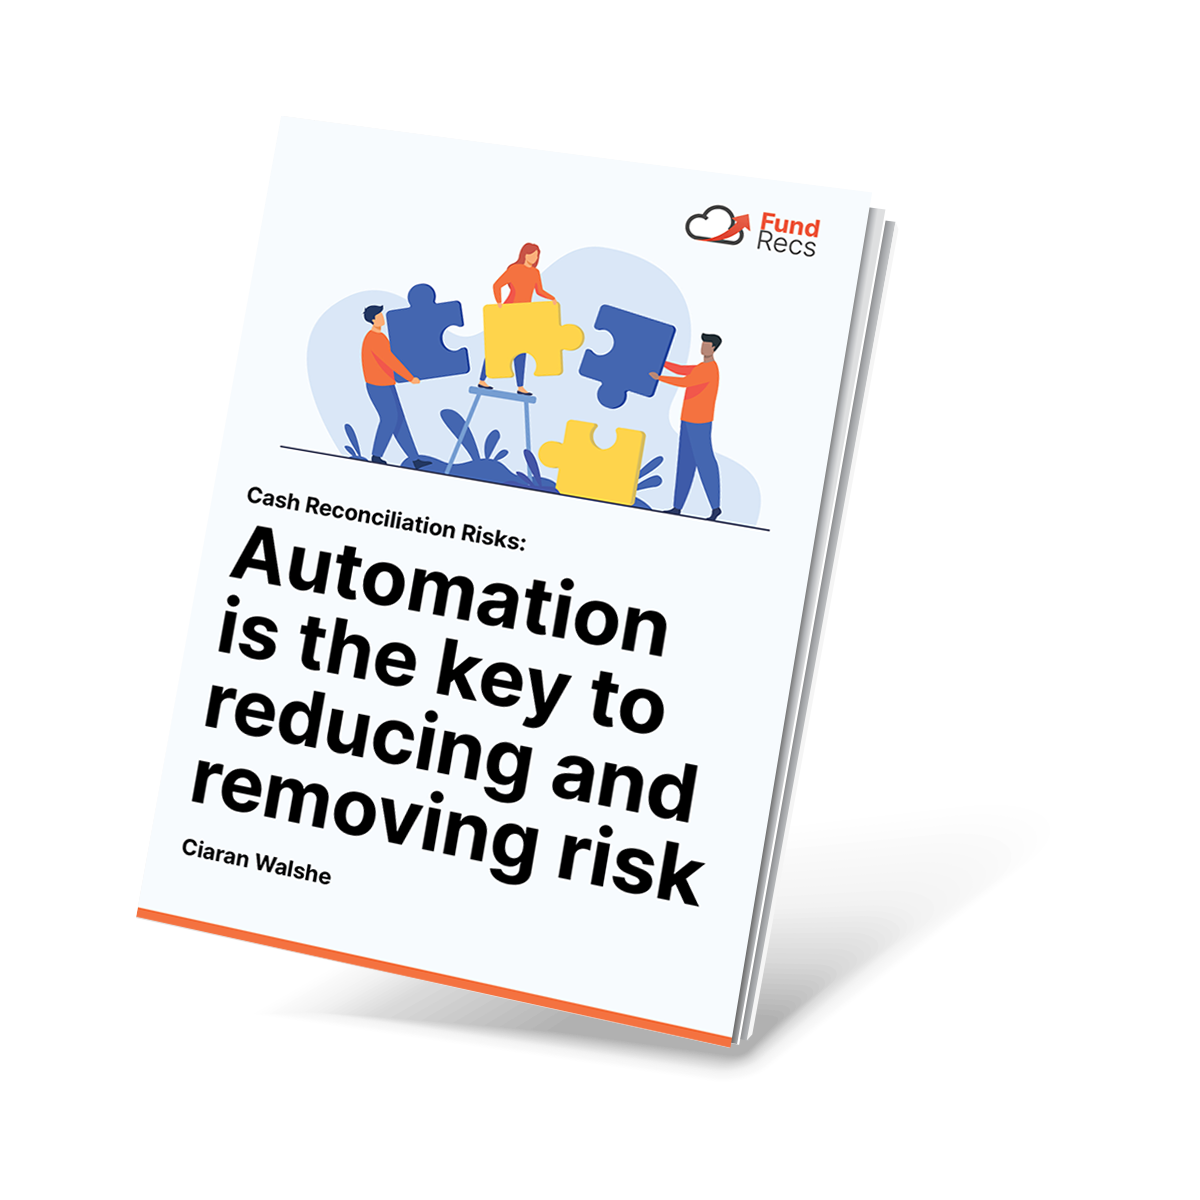 Cash Reconciliation Risks: Automating is the key to reducing and removing risk